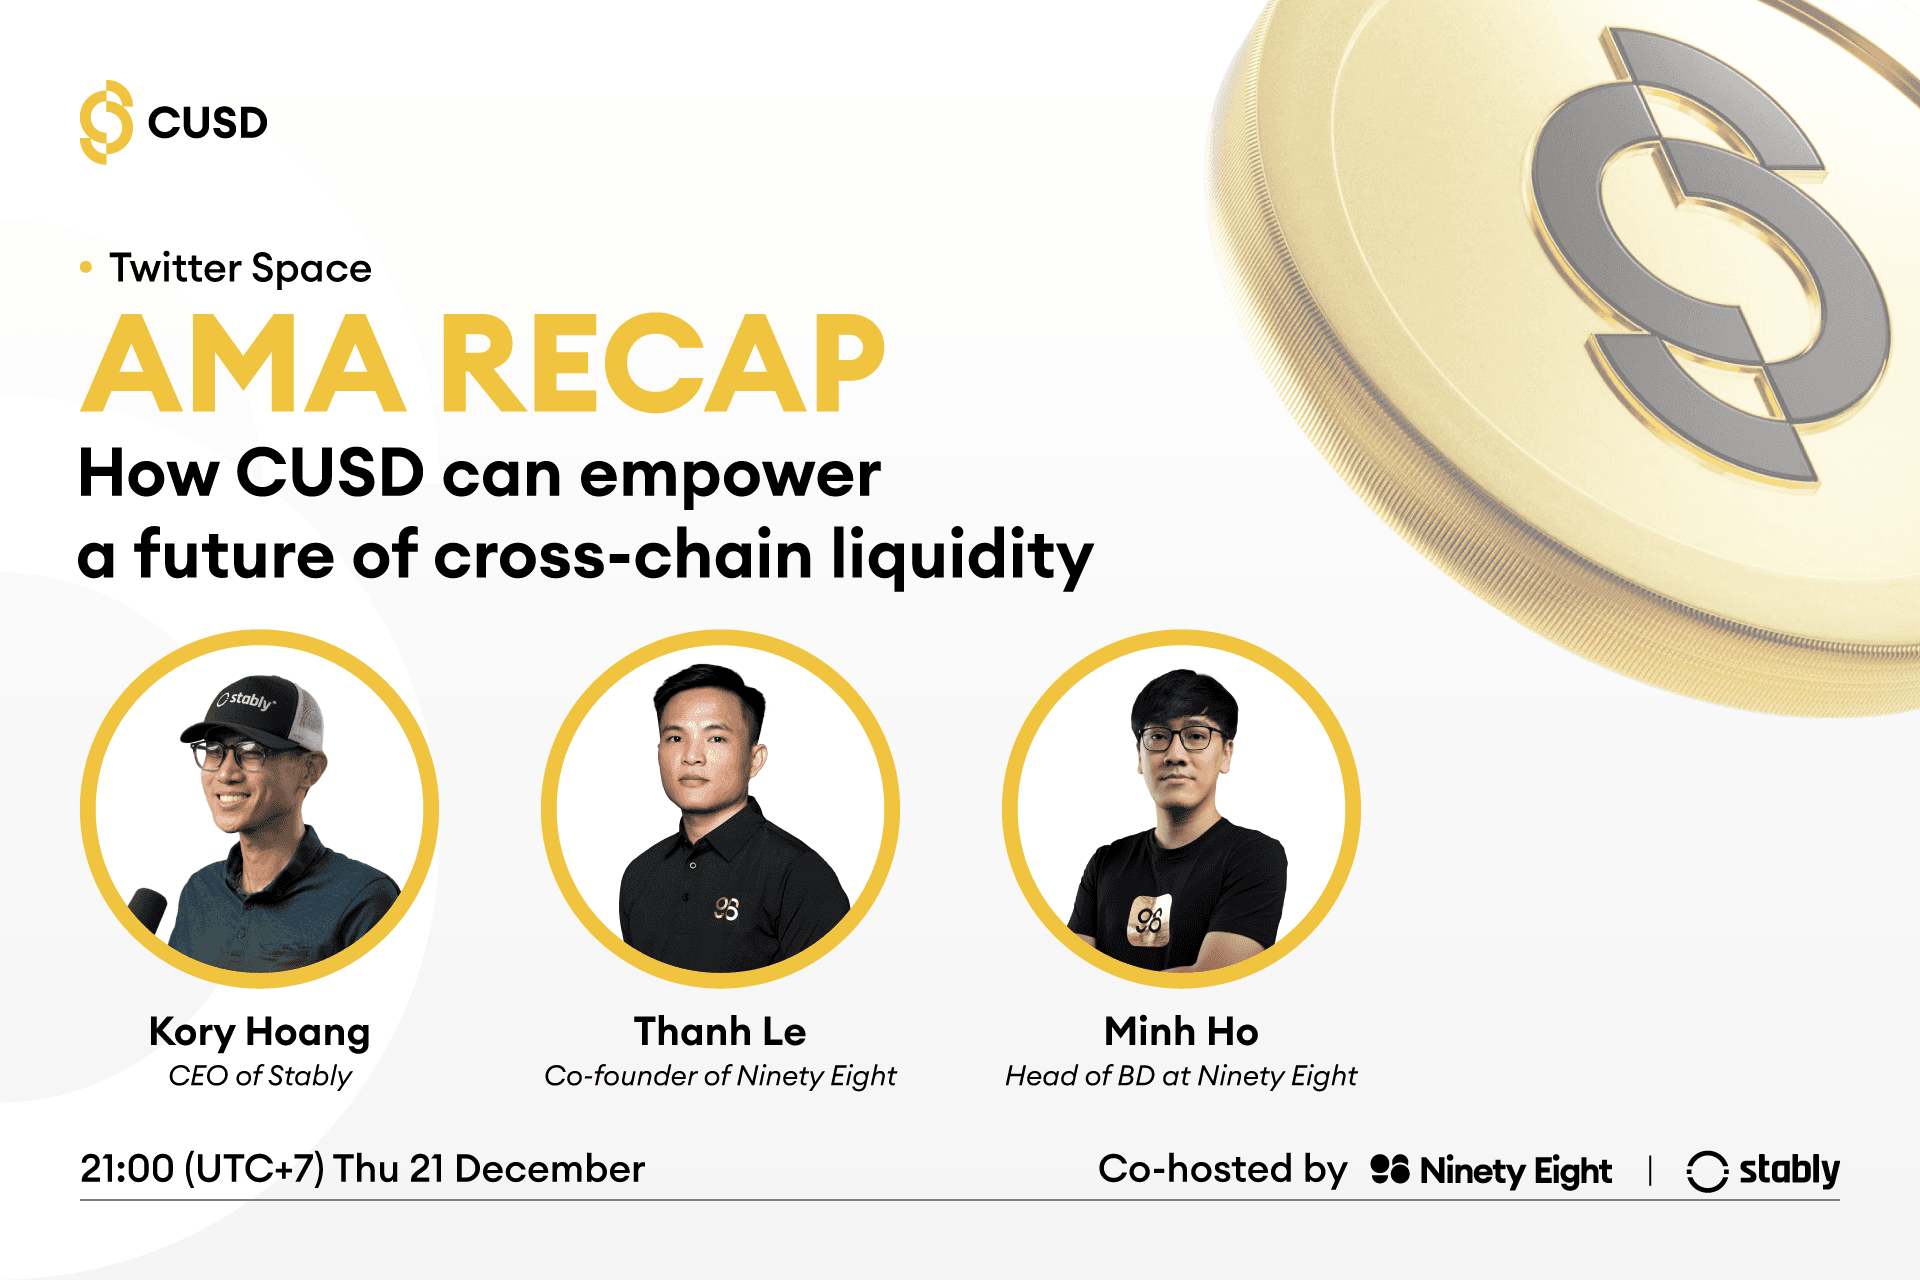 How CUSD can empower a future of cross-chain liquidity: A Recap